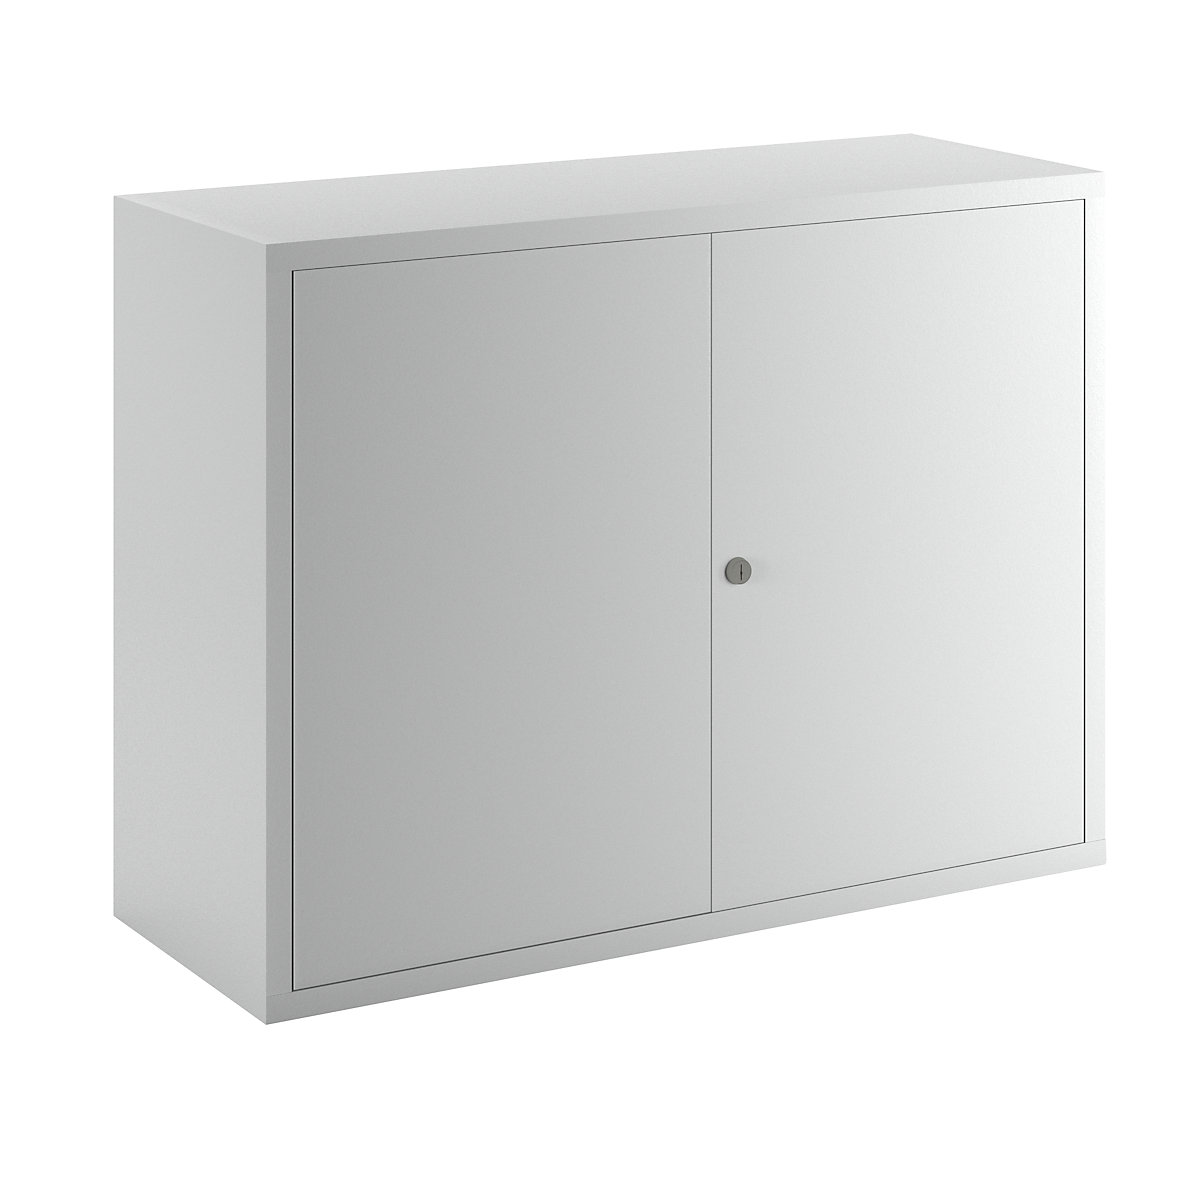 Wall mounted cupboard, height 600 mm – Pavoy, with solid panel door/s, width 800 mm, perforated rear panel, grey-6